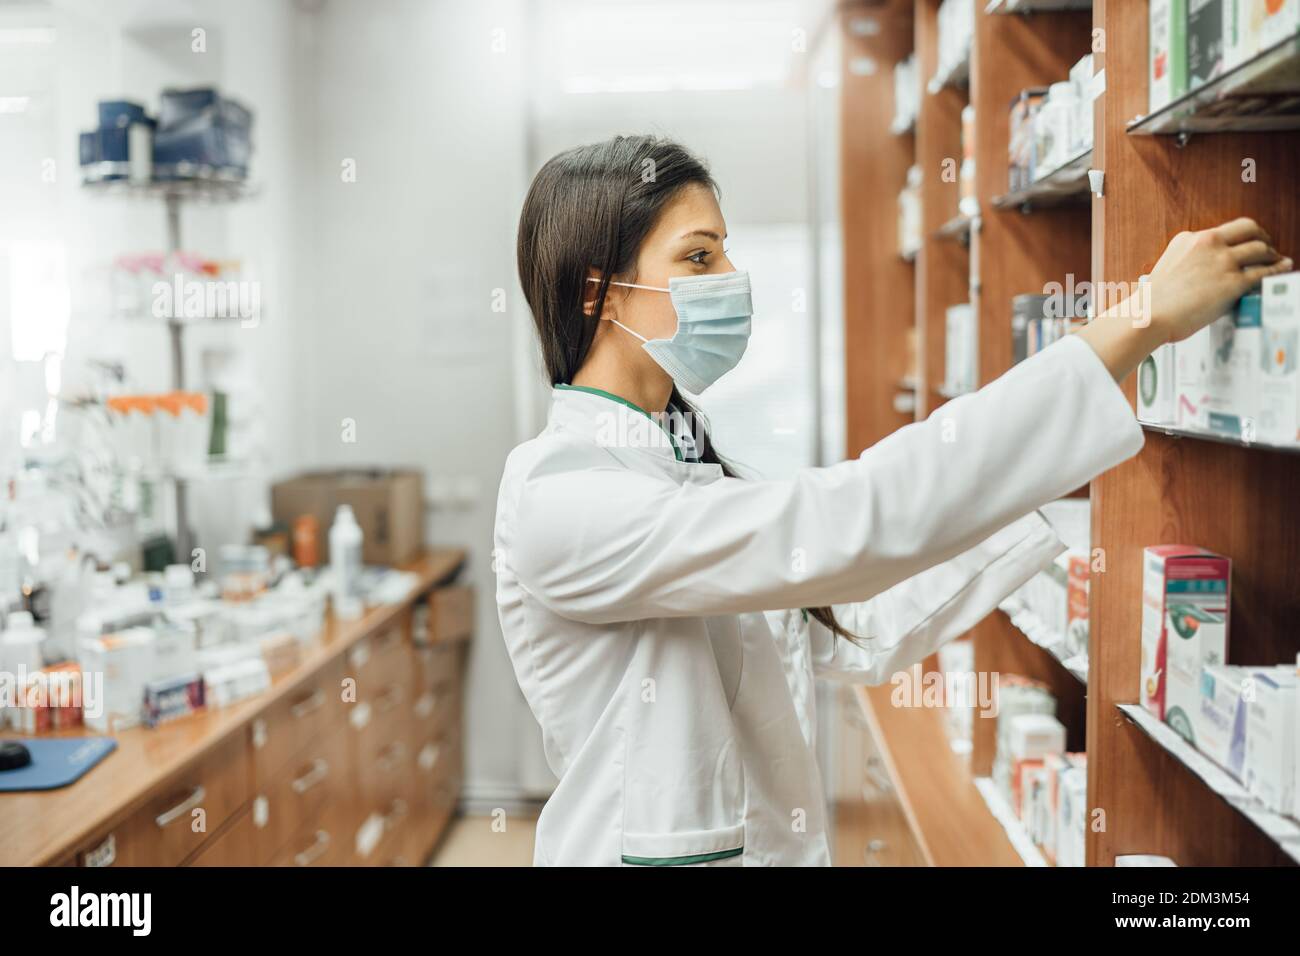 Pharmaceutical professional working in a pharmacy during COVID-19 outbreak.Young pharmacist wearing a protective mask.Coronavirus pandemic health care Stock Photo